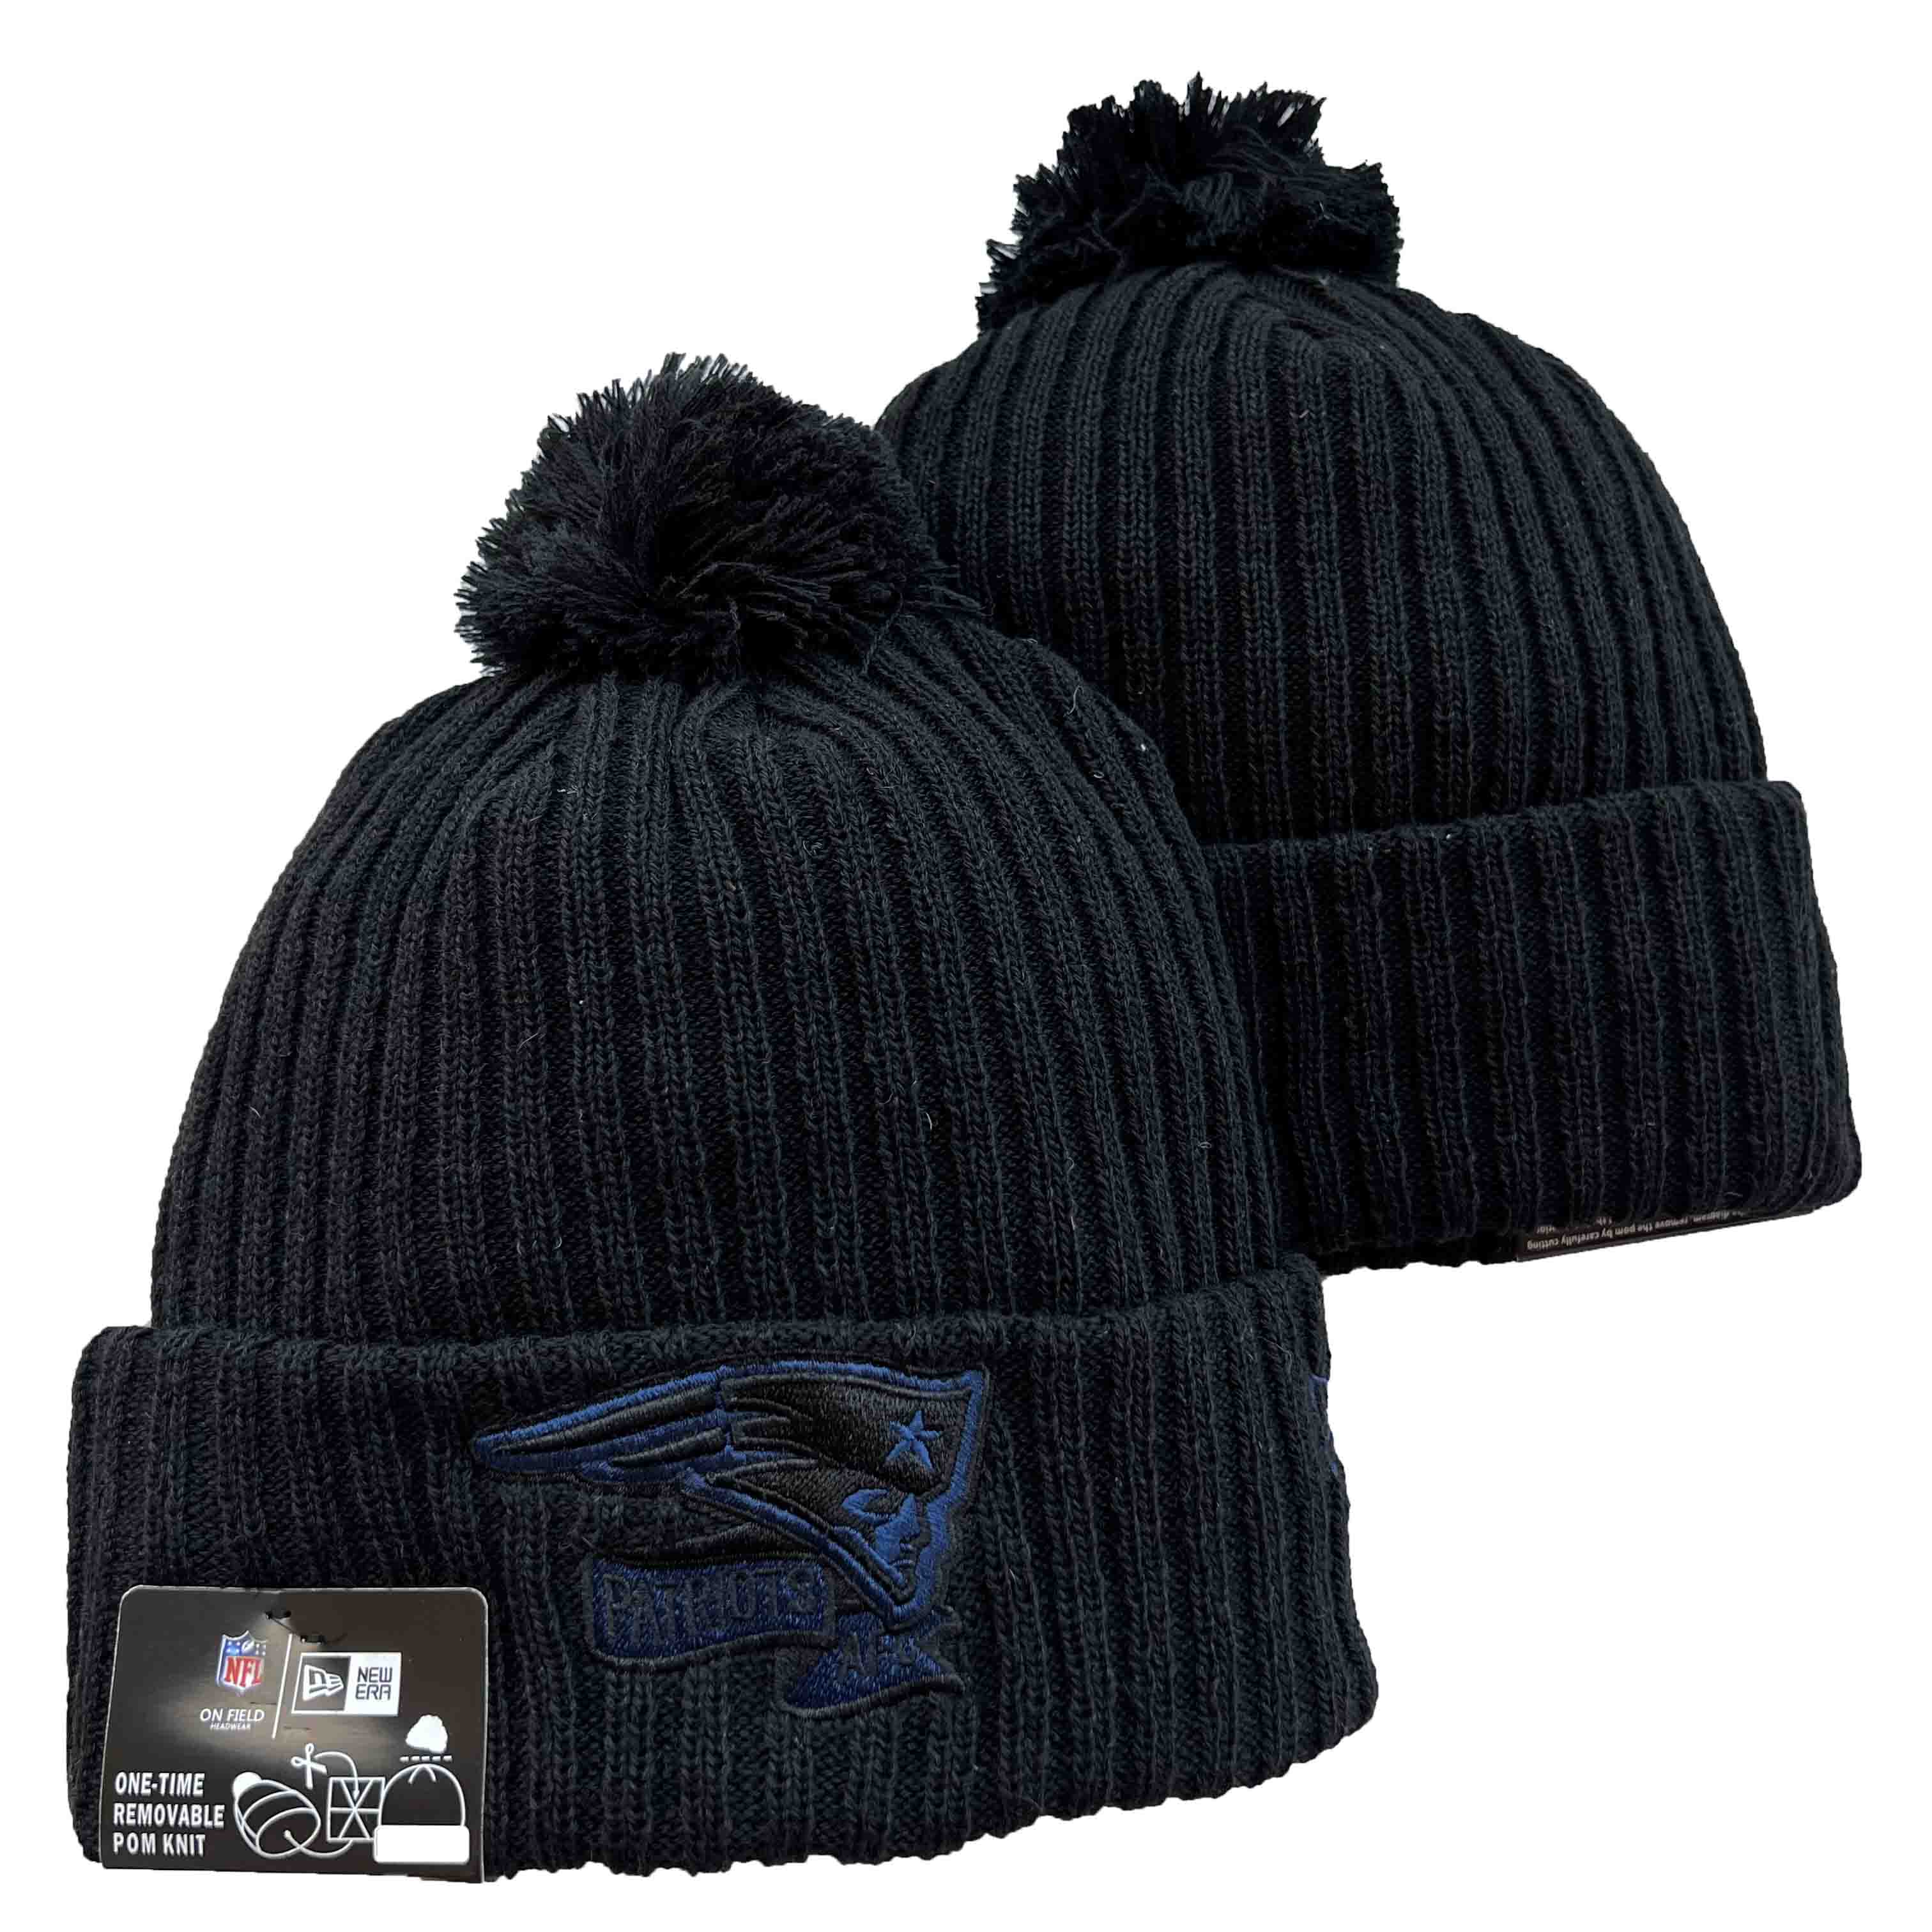 NFL New England Patriots Beanies Knit Hats-YD1249